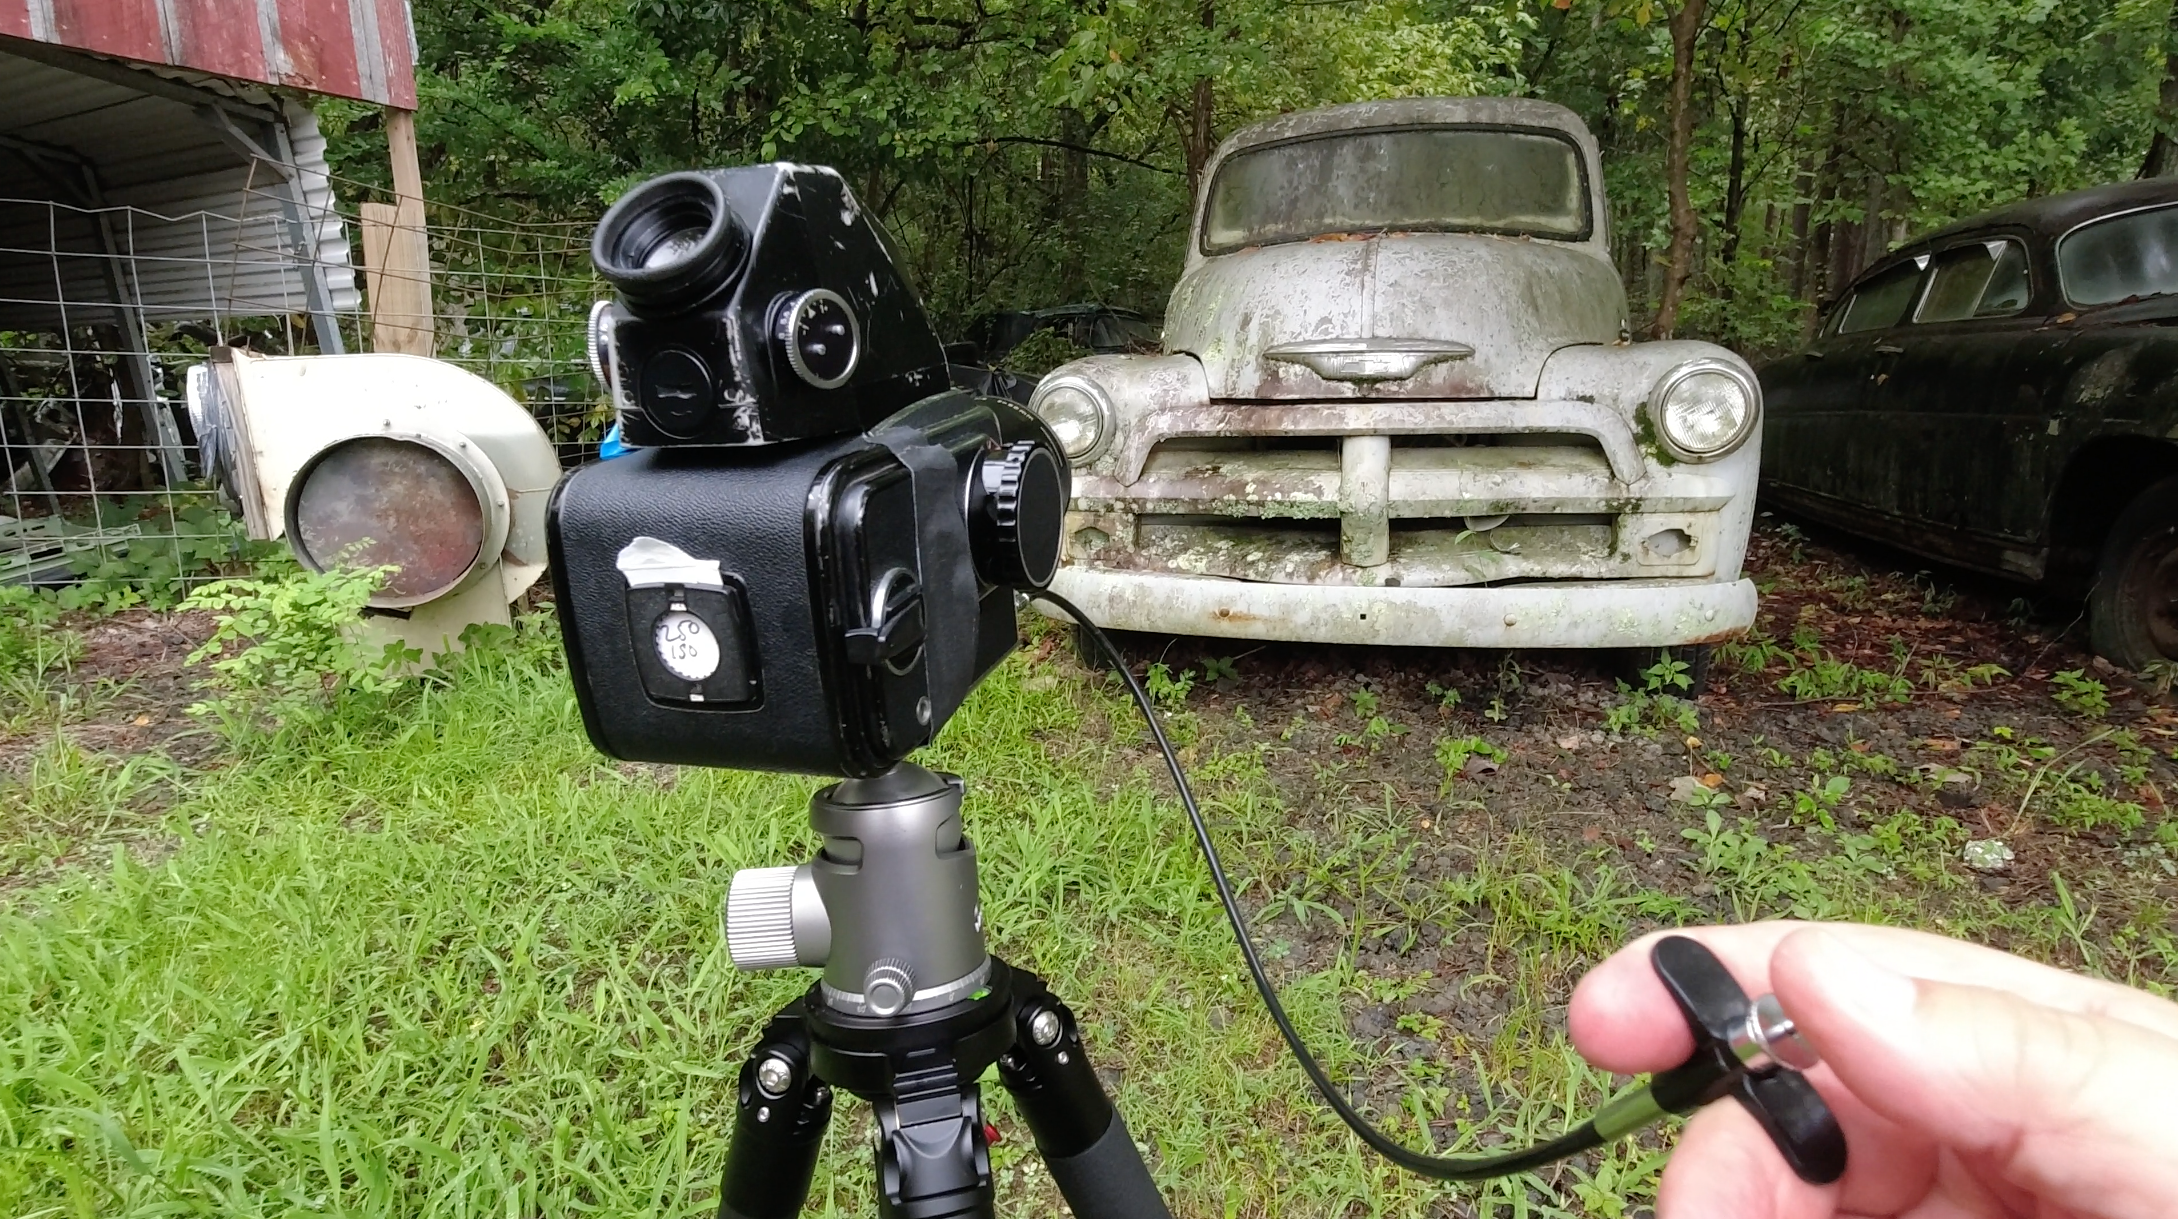 Behind-the-scenes photograph of Keith Dotson's Hasselblad on location in the junkyard, which is located in the southern United States